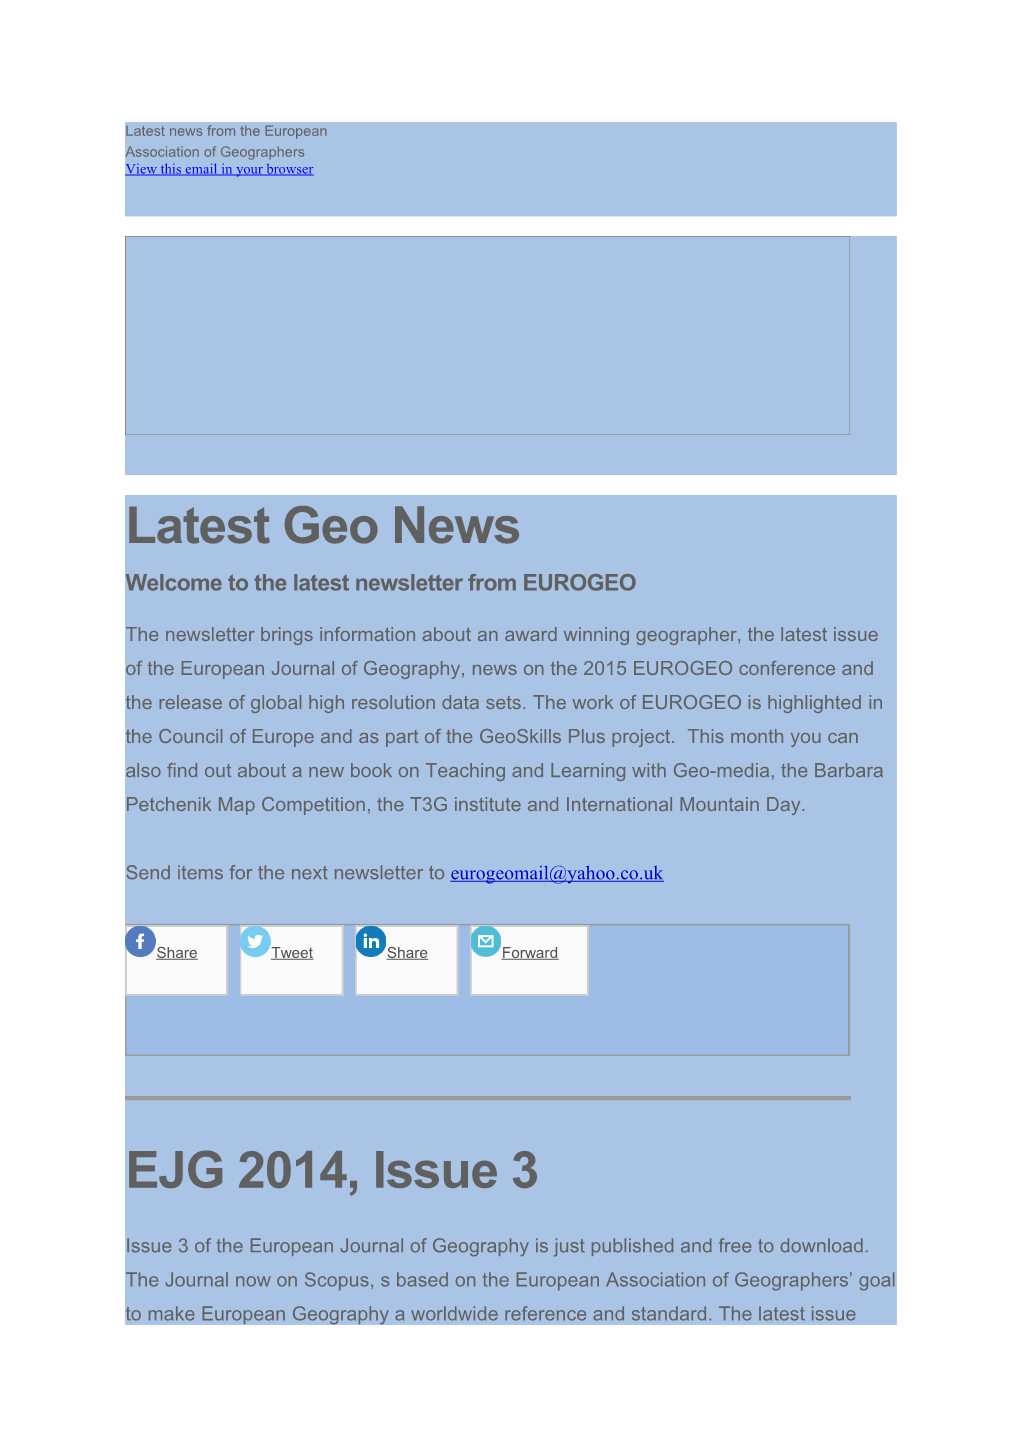 Welcome to the Latest Newsletter from EUROGEO